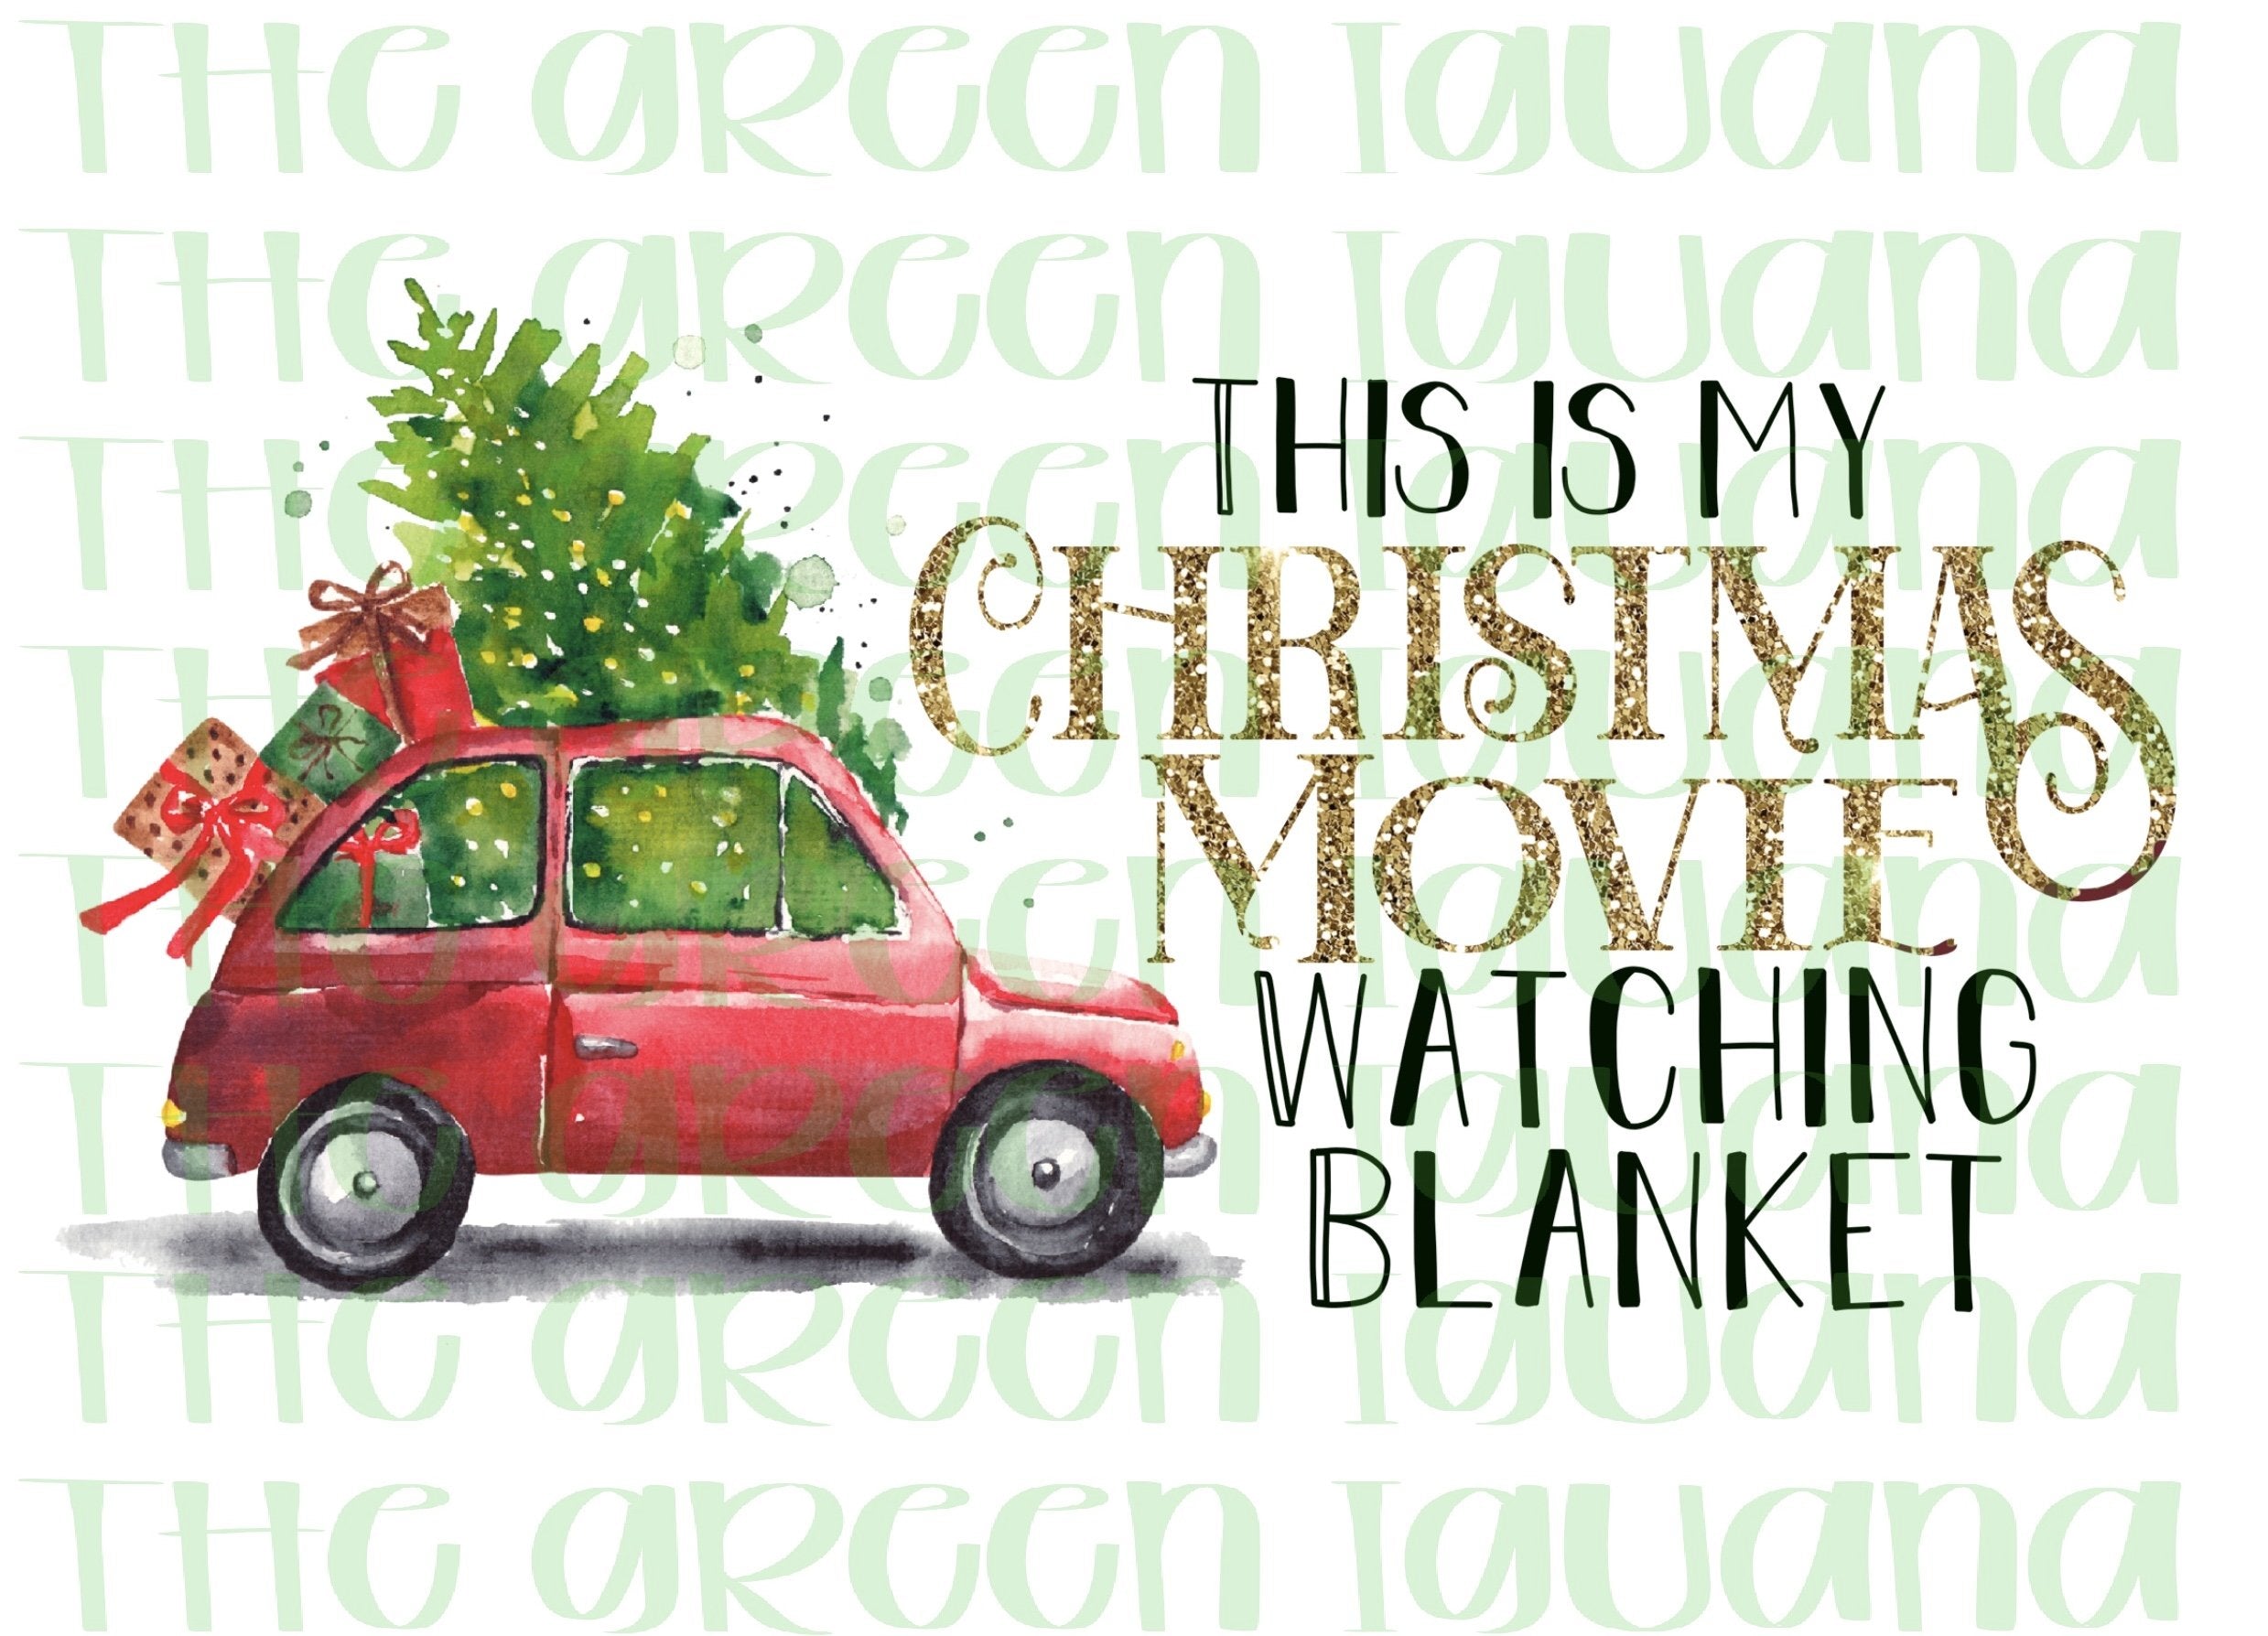 This is my Christmas movie watching blanket